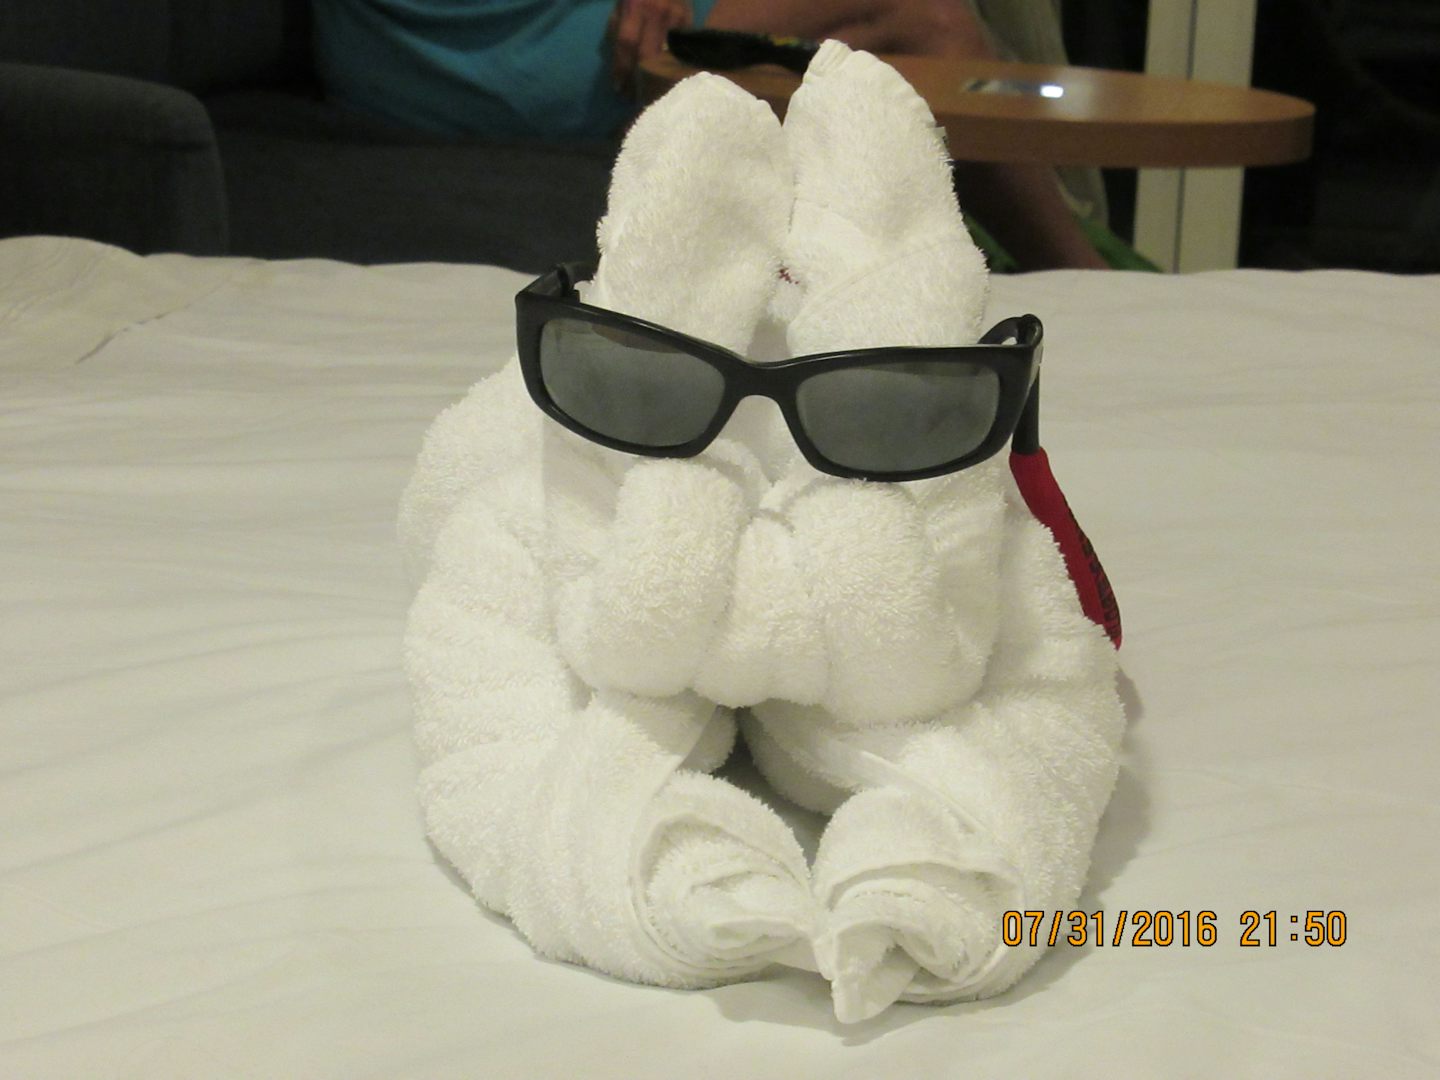 A rabbit made by our steward.